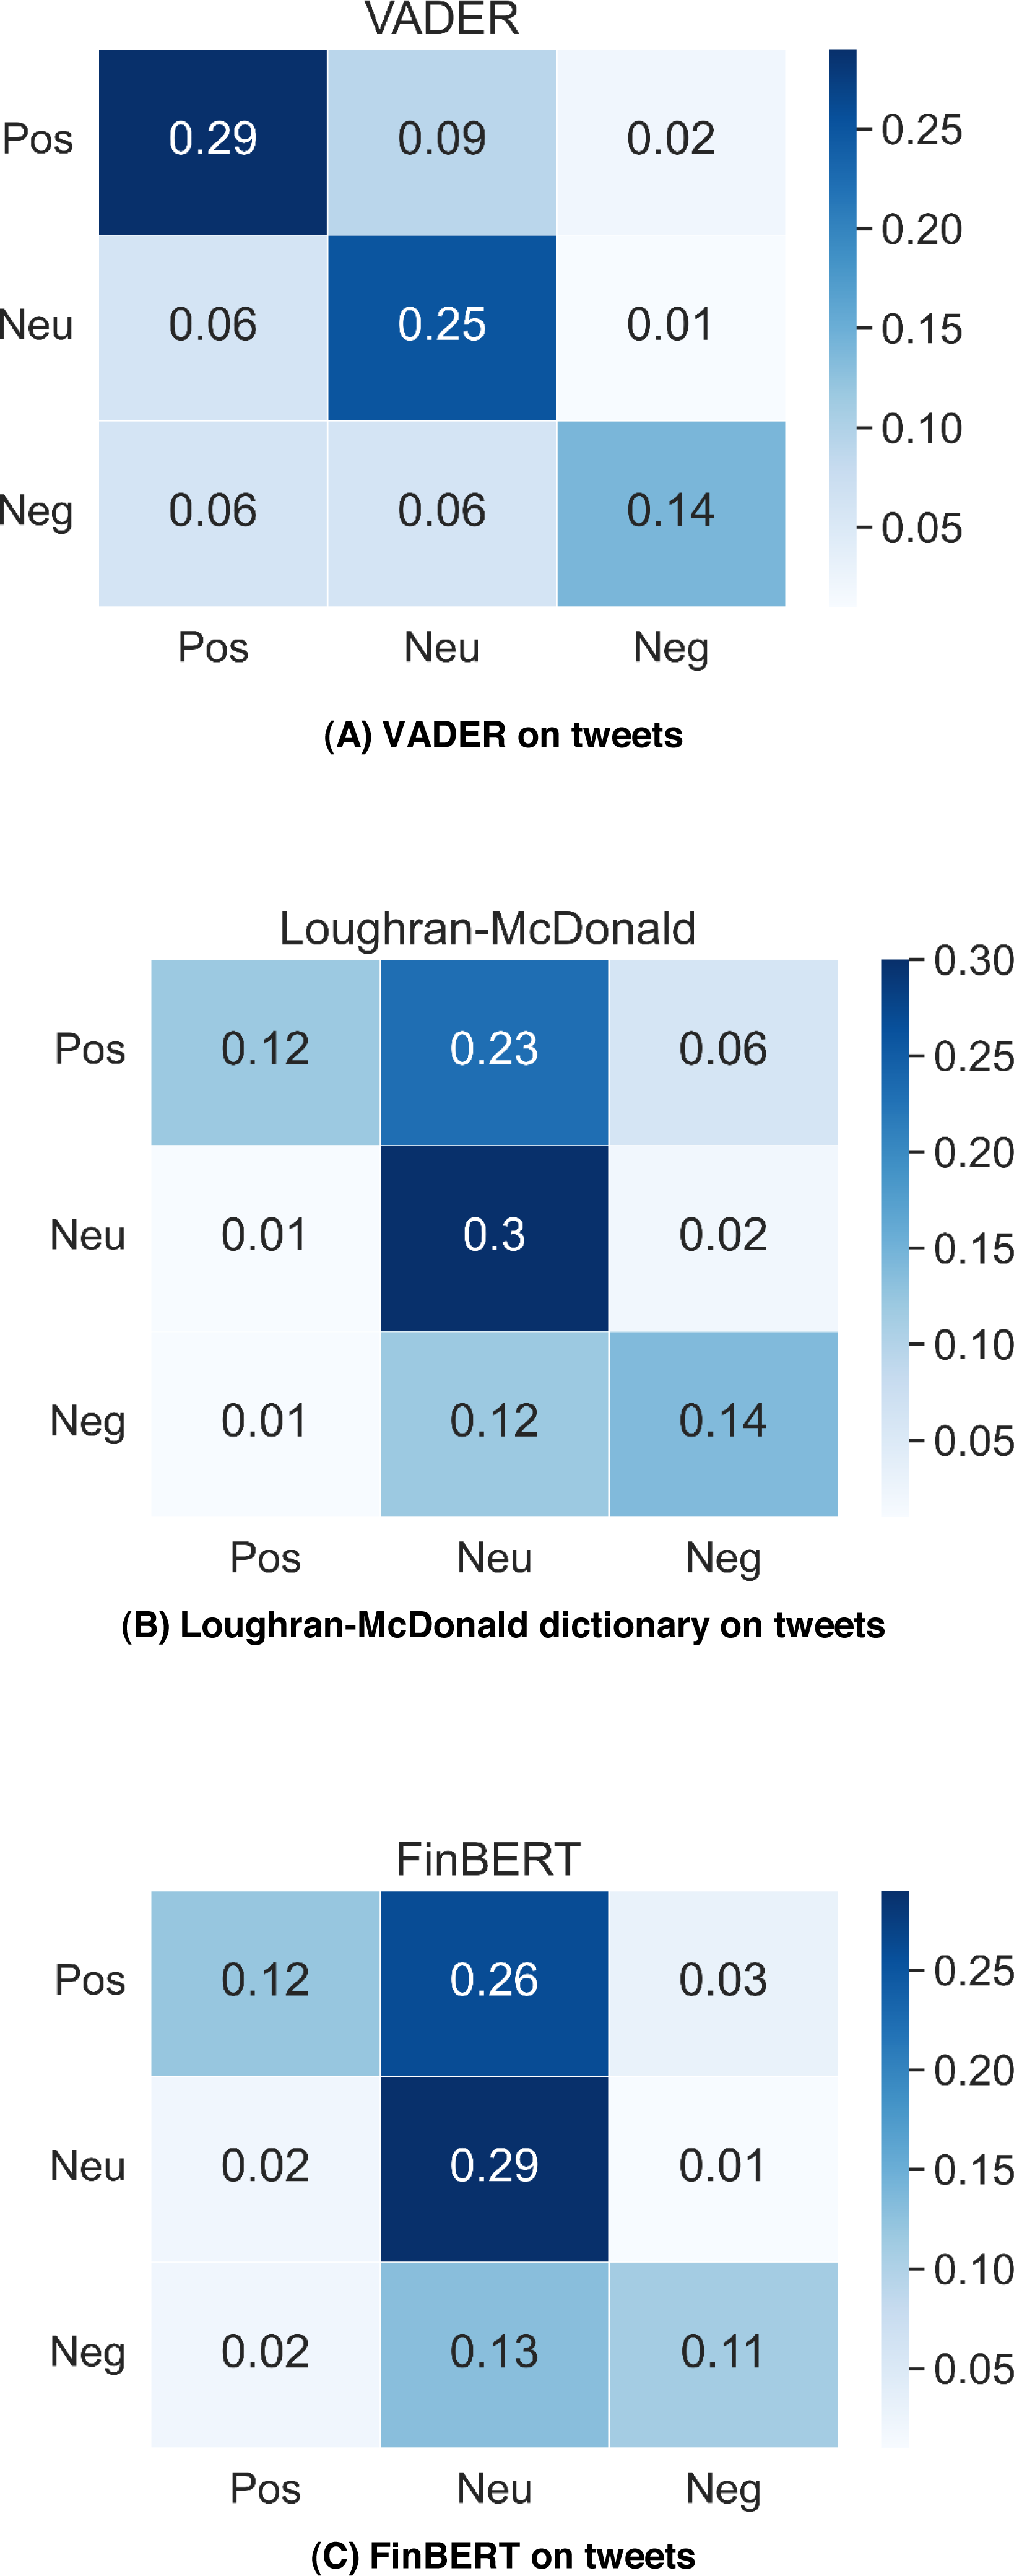 Algorithmic Trading with Twitter Sentiment Analysis